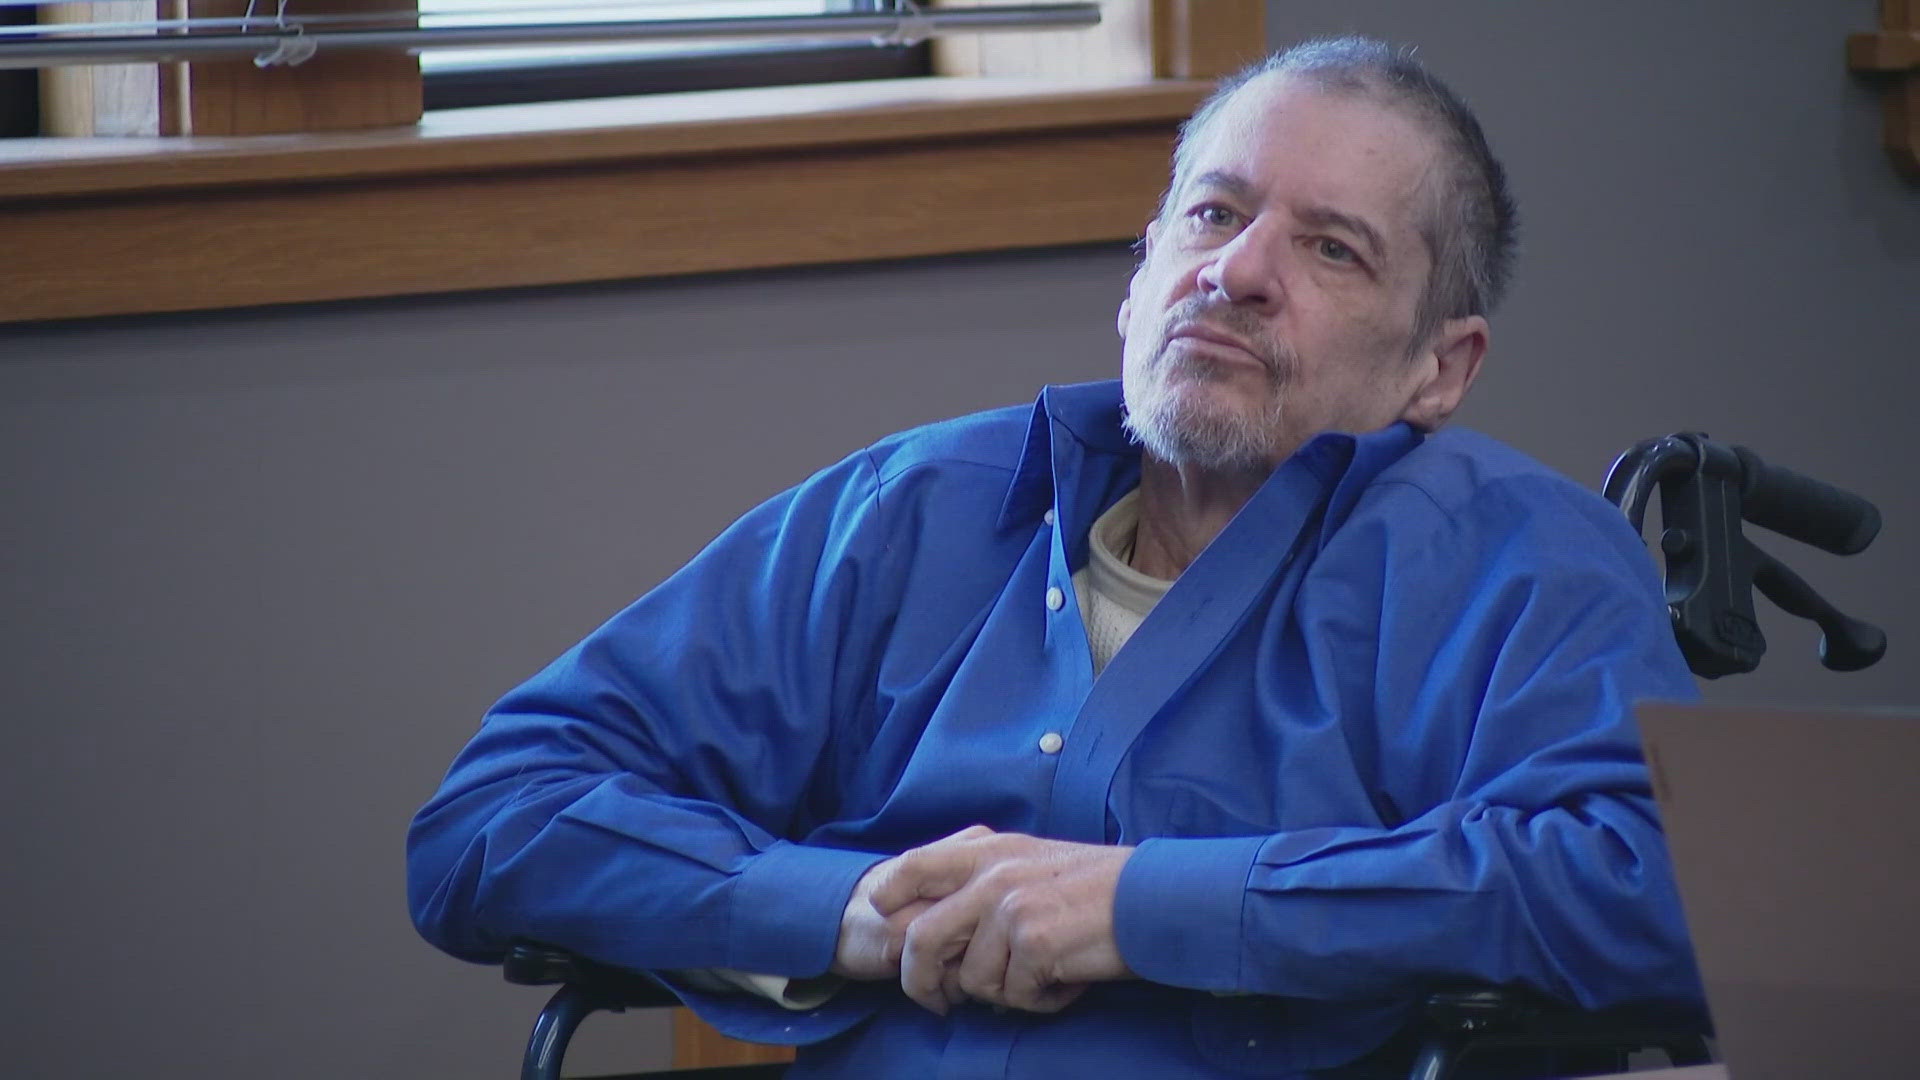 Alan Dean was sentenced to 26.5 years in prison after he was found guilty of murder by a jury last month.